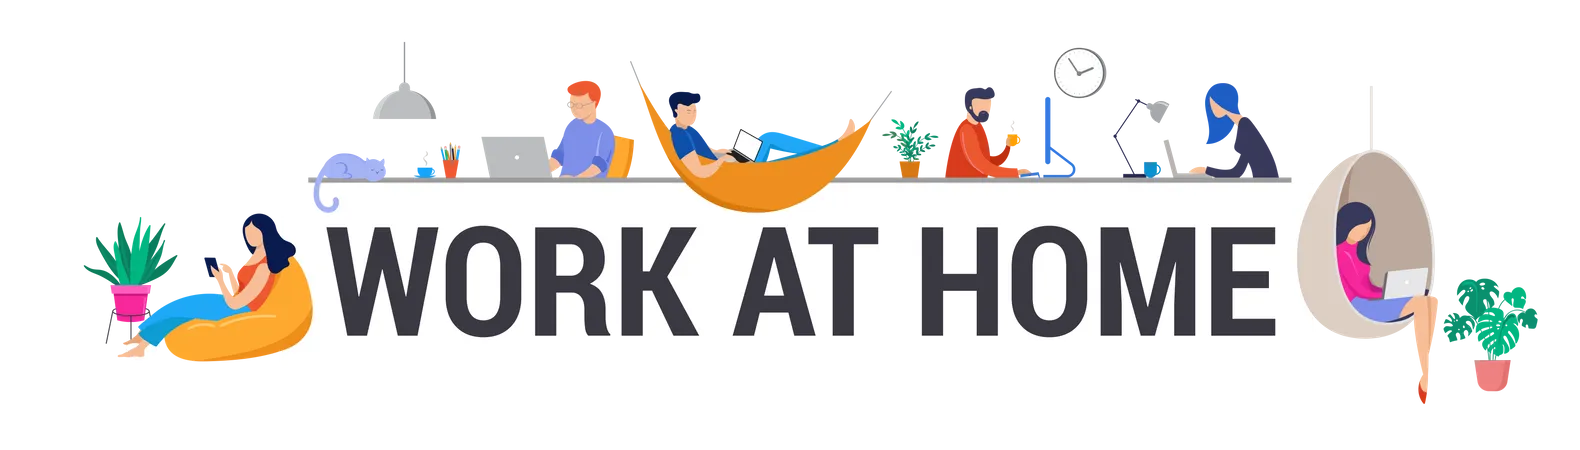 People Working From Home Illustration